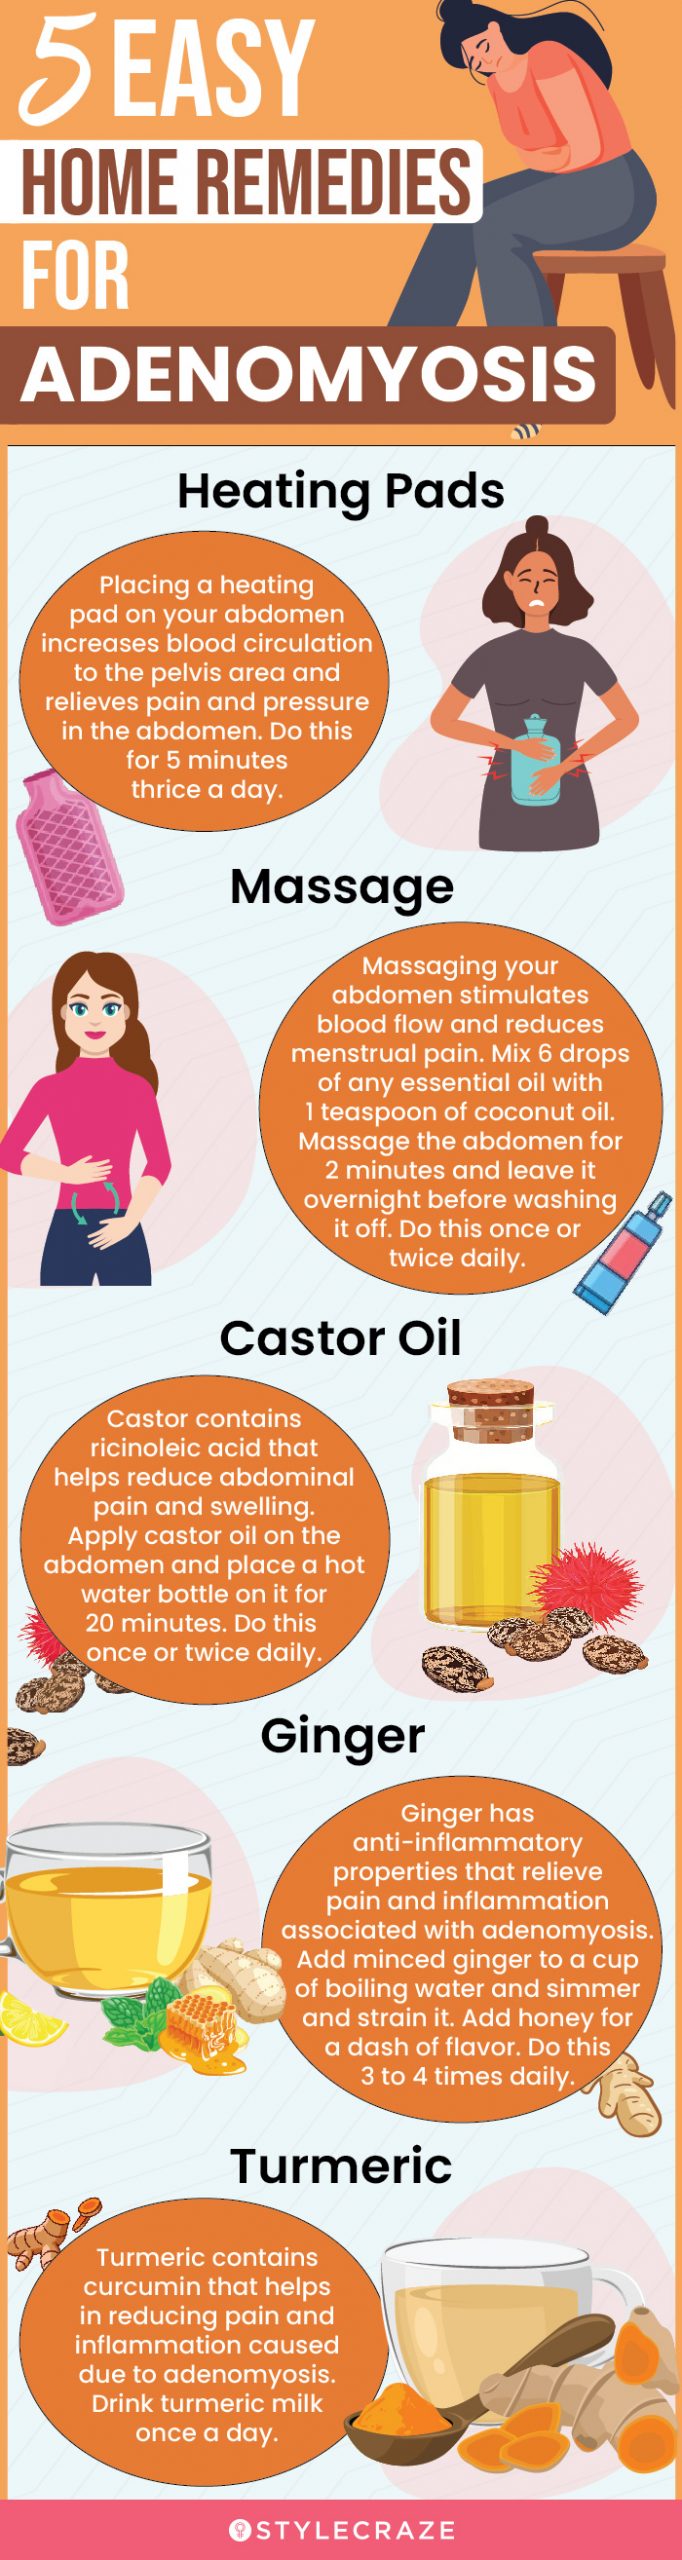 5 easy home remedies for adenomyosis (infographic)